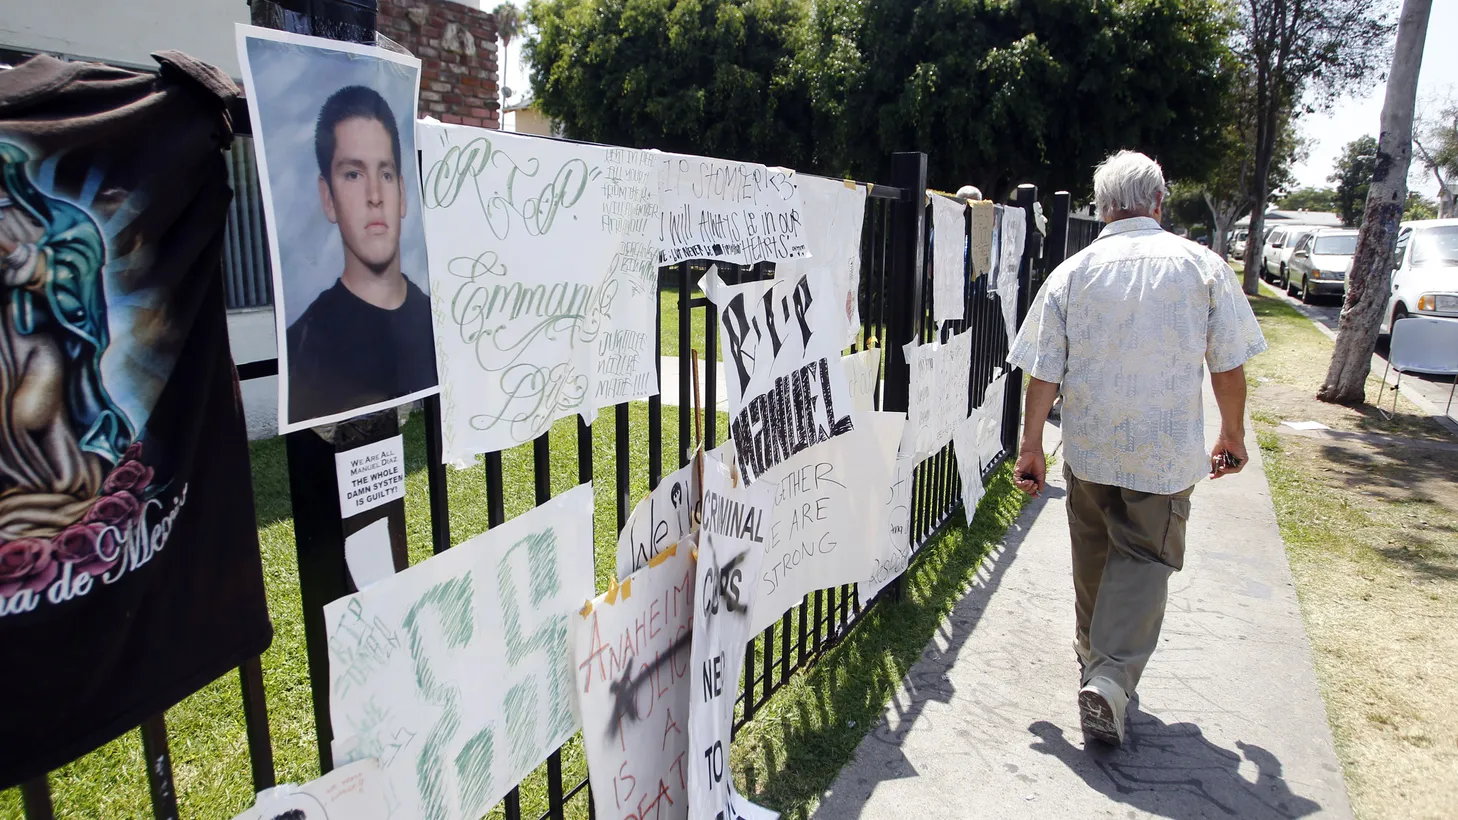 Posters, photos, and signs in support of Manuel Diaz — who was shot dead on July 21, 2022 by Anaheim police — are seen at the site of the shooting on Anna Drive in Anaheim, California, August 4, 2012.